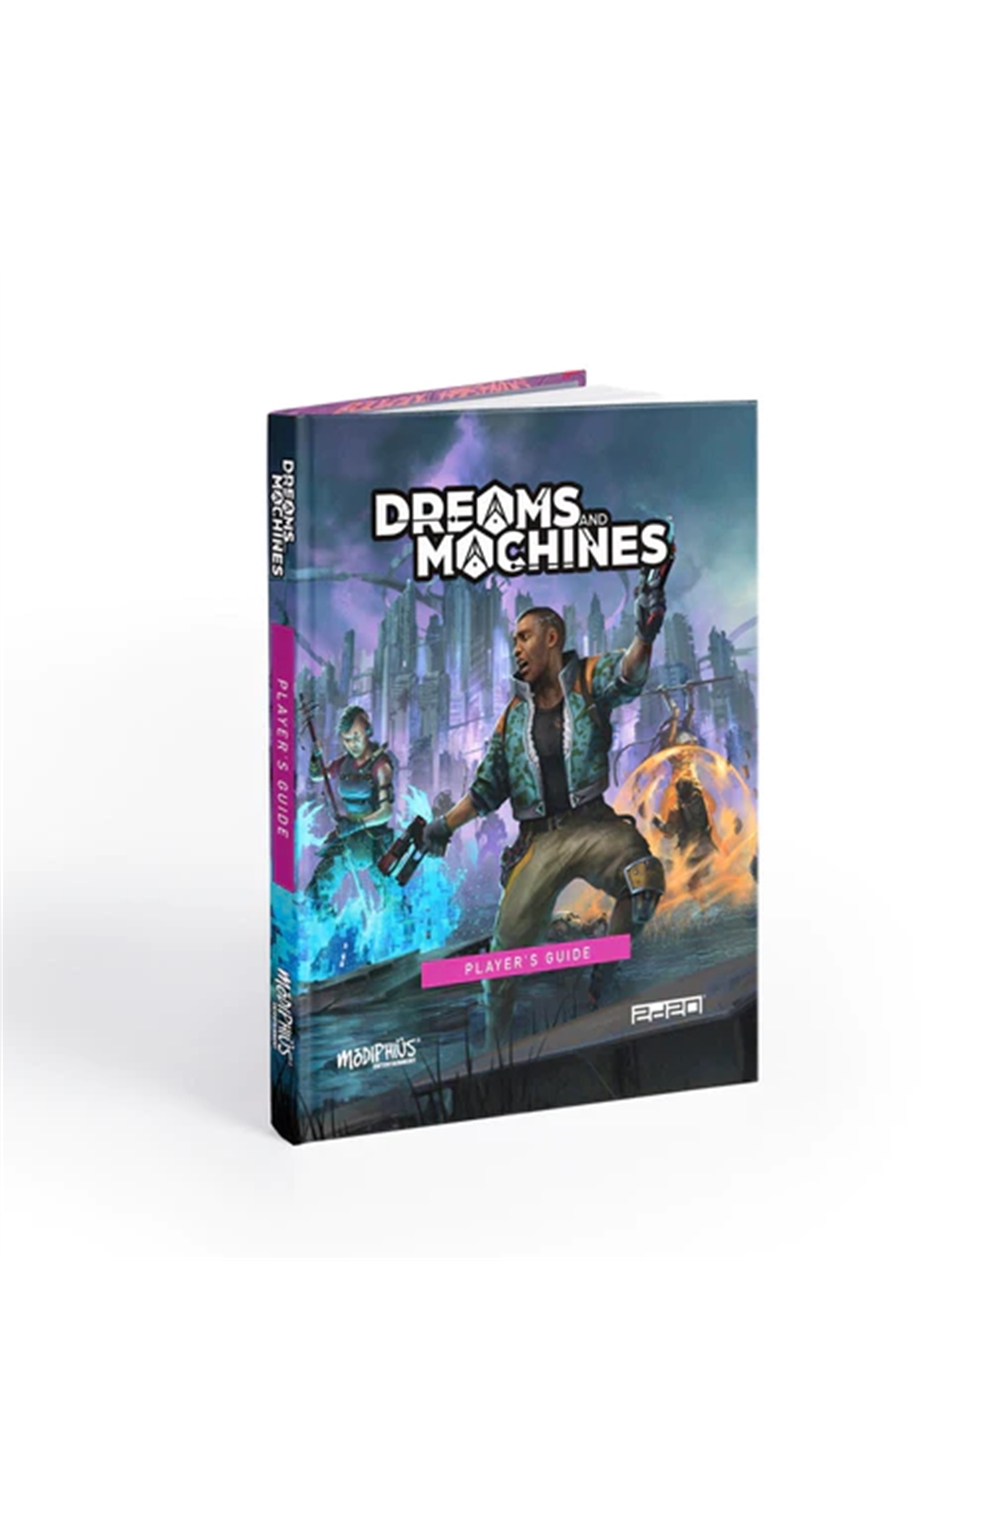 Dreams And Machines - Player's Guide